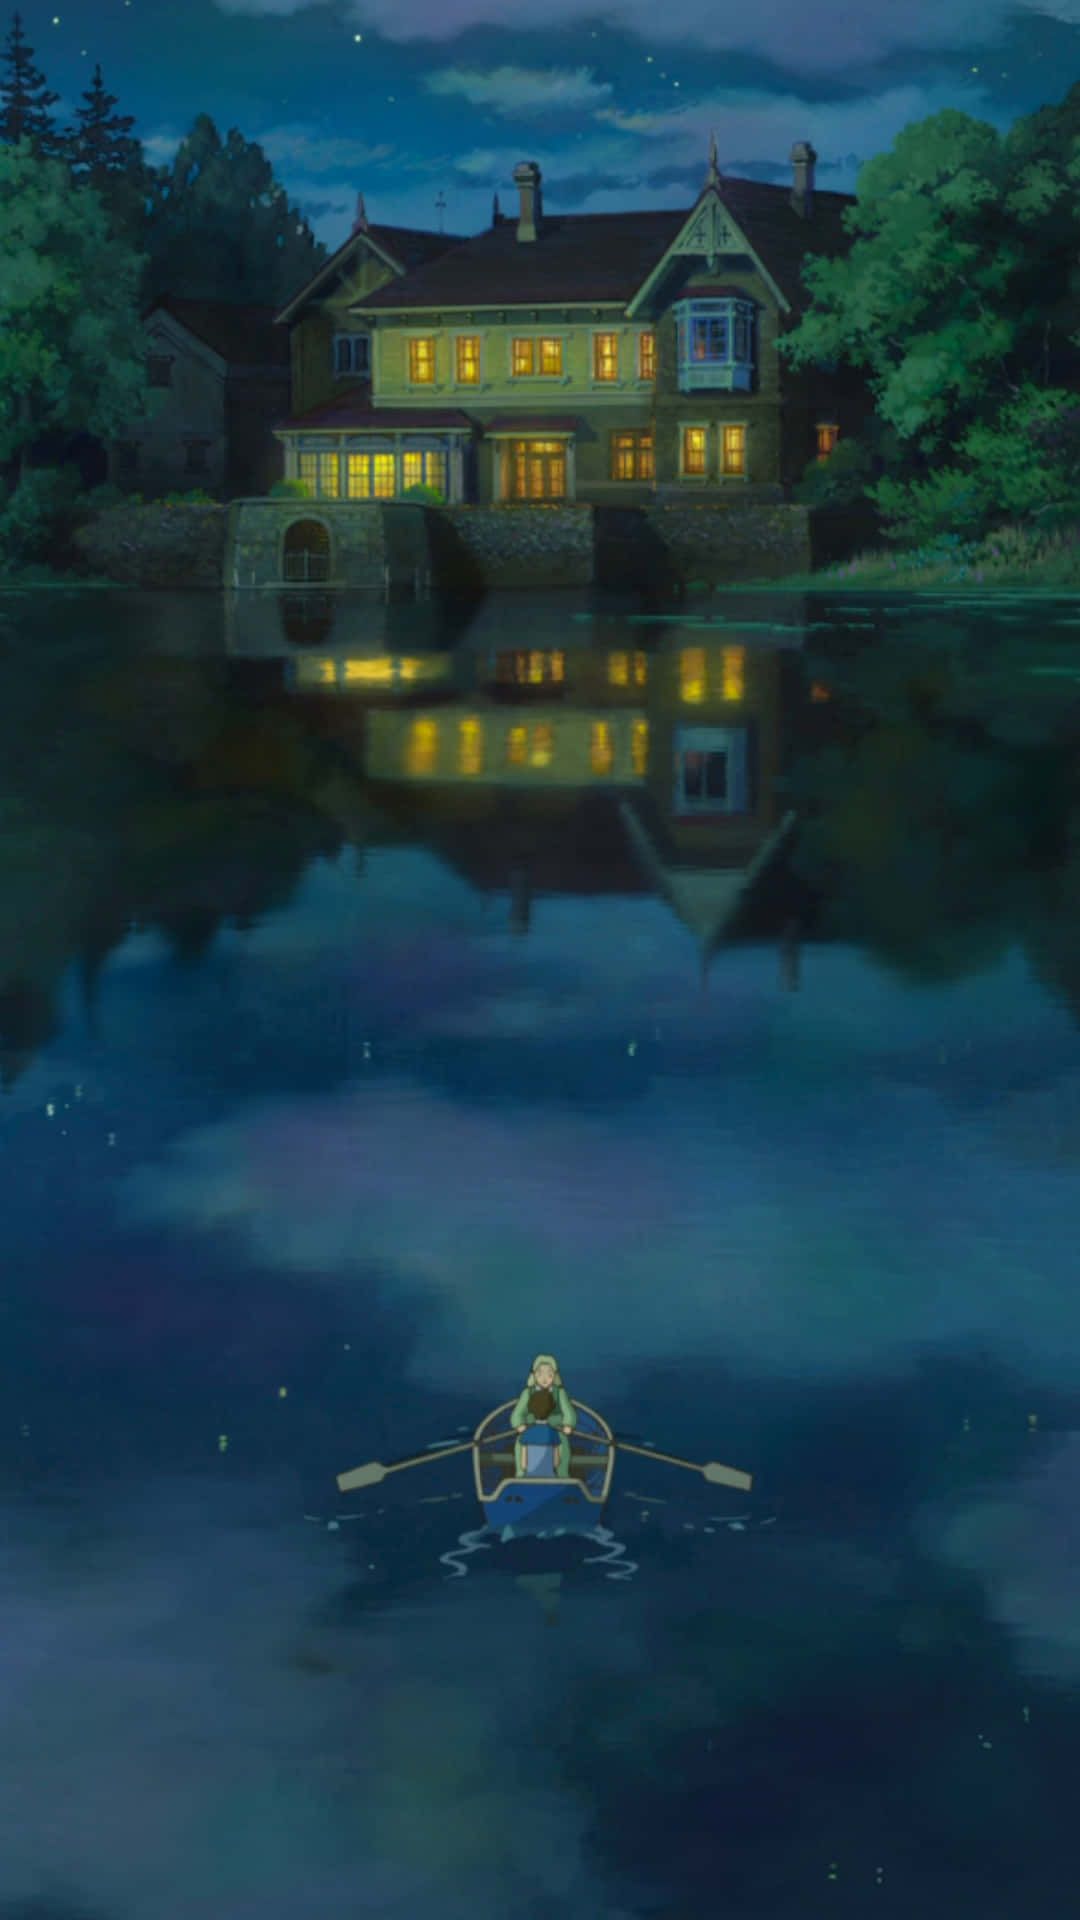 Enjoy Watching Classics From Studio Ghibli With Your Phone Wallpaper